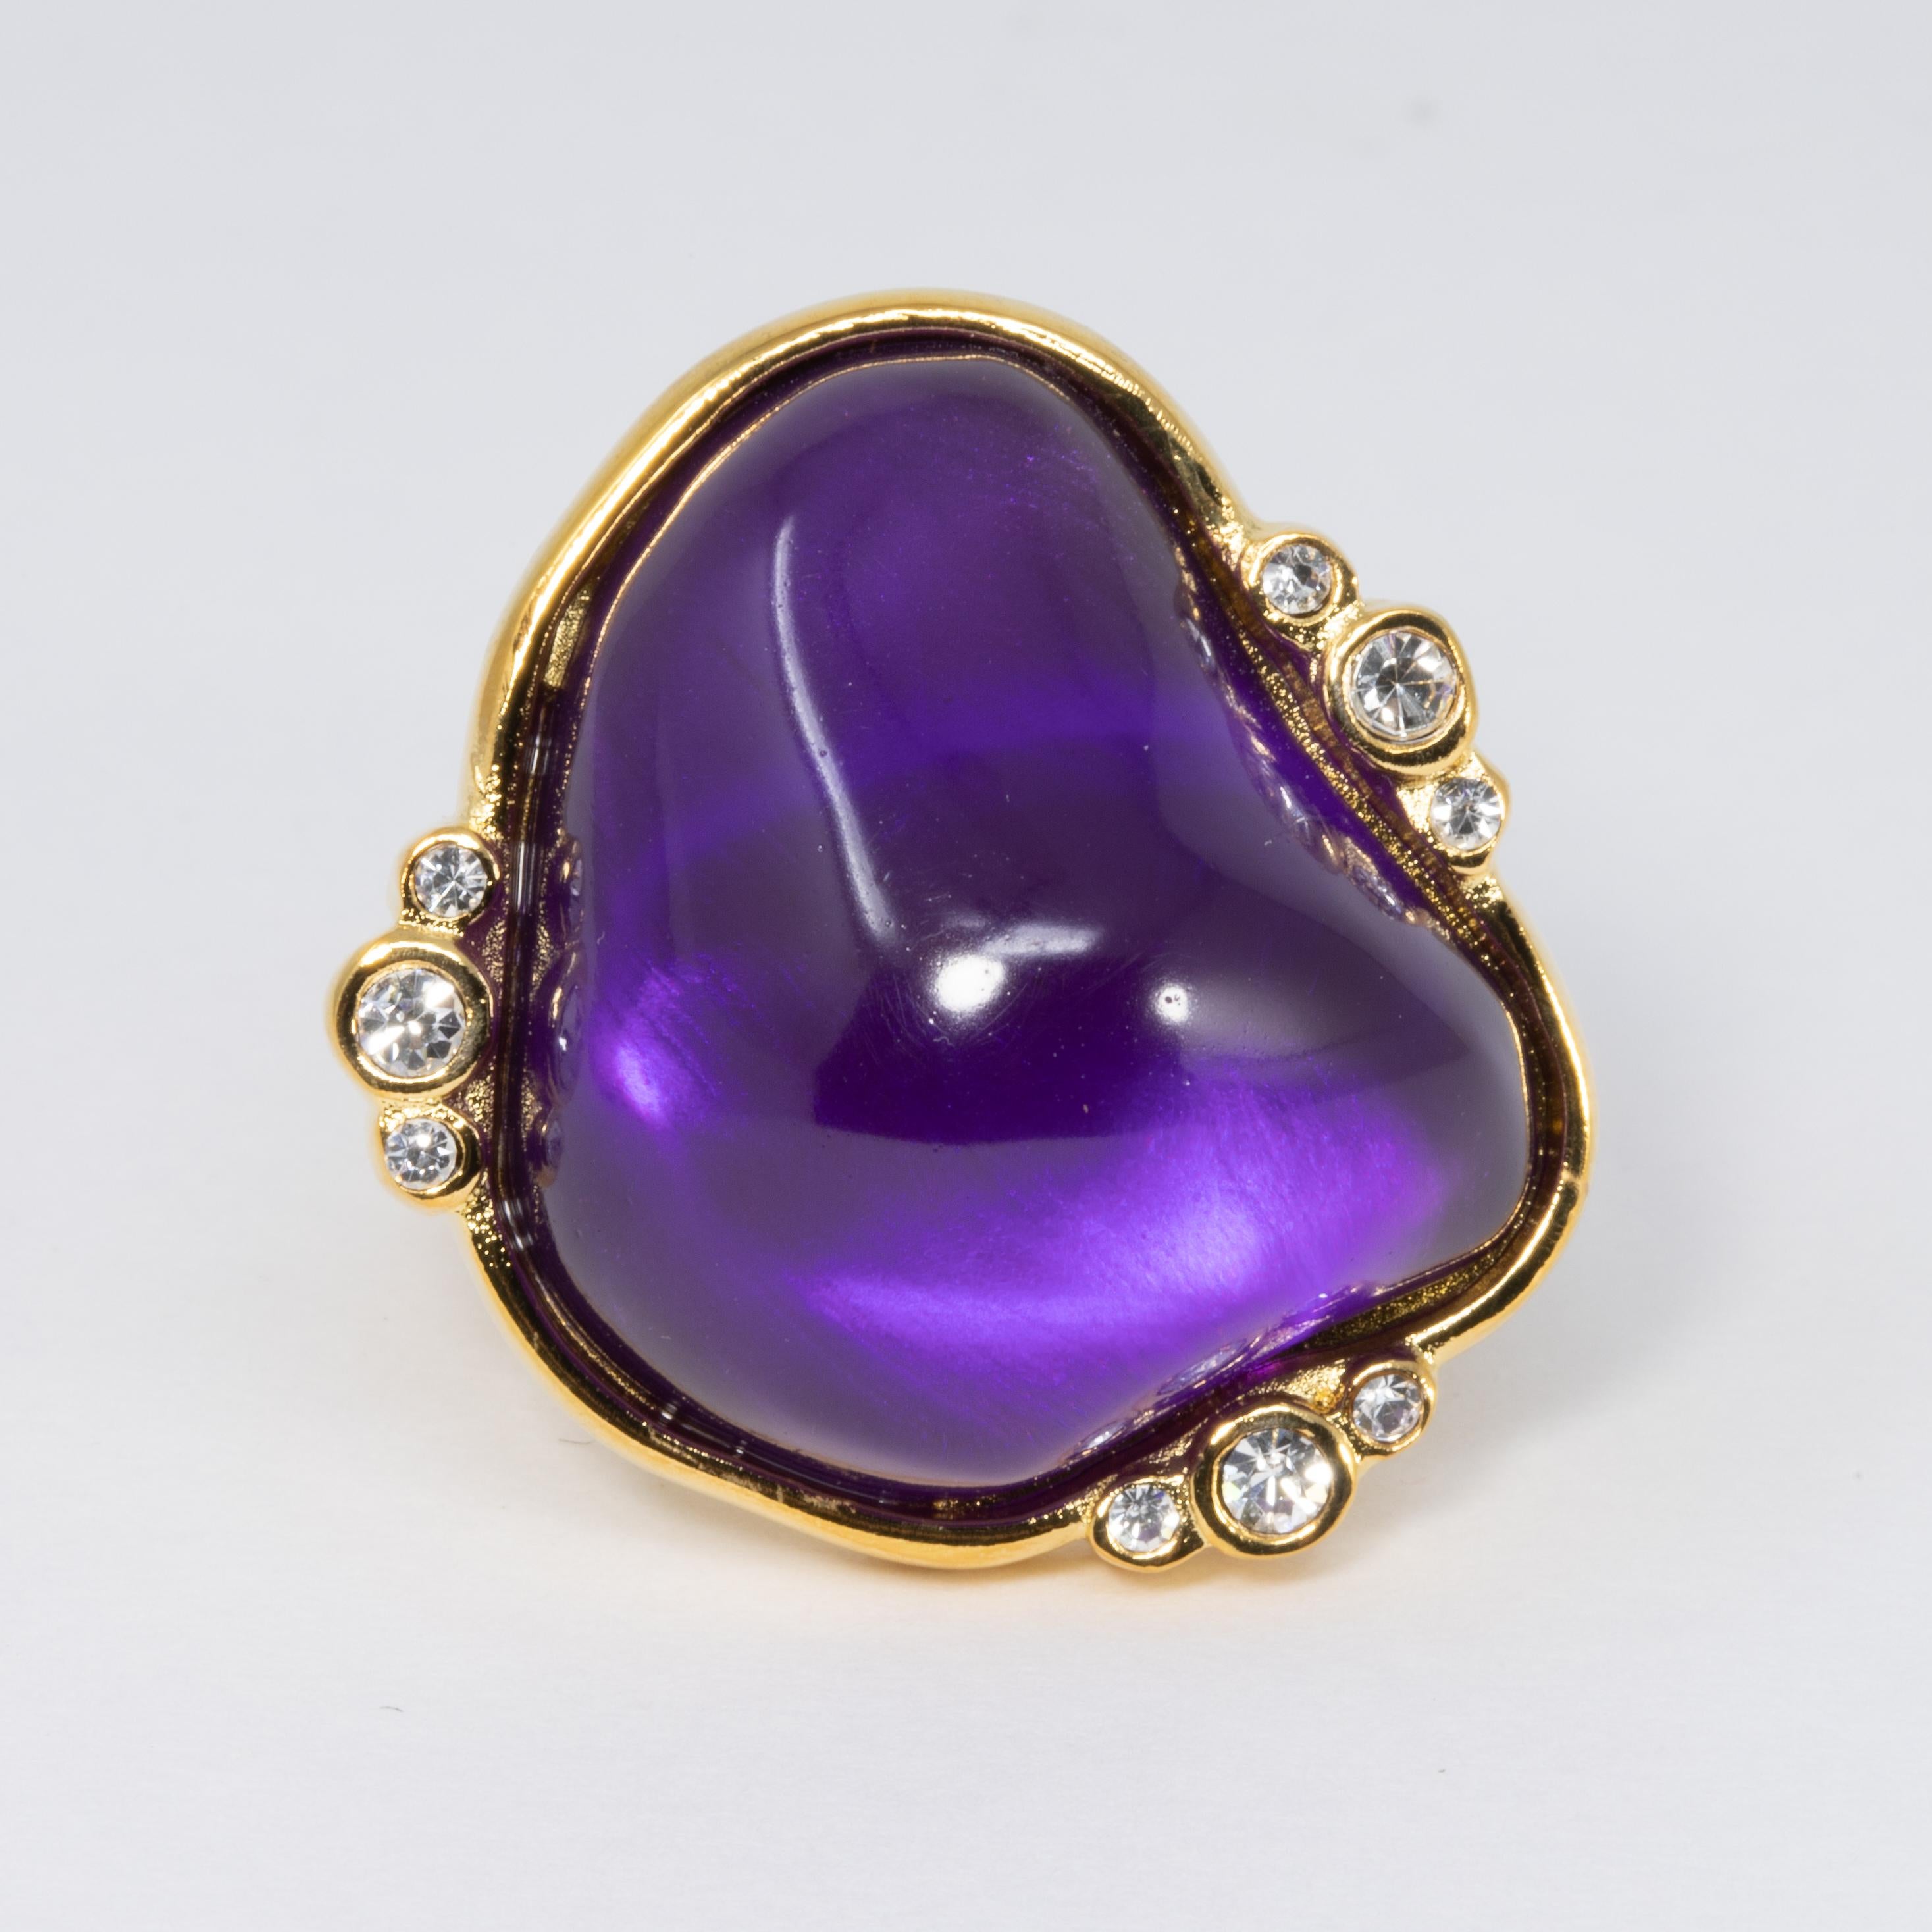 Modern Kenneth Jay Lane Gold Amethyst Cabochon Cocktail Ring, Contemporary